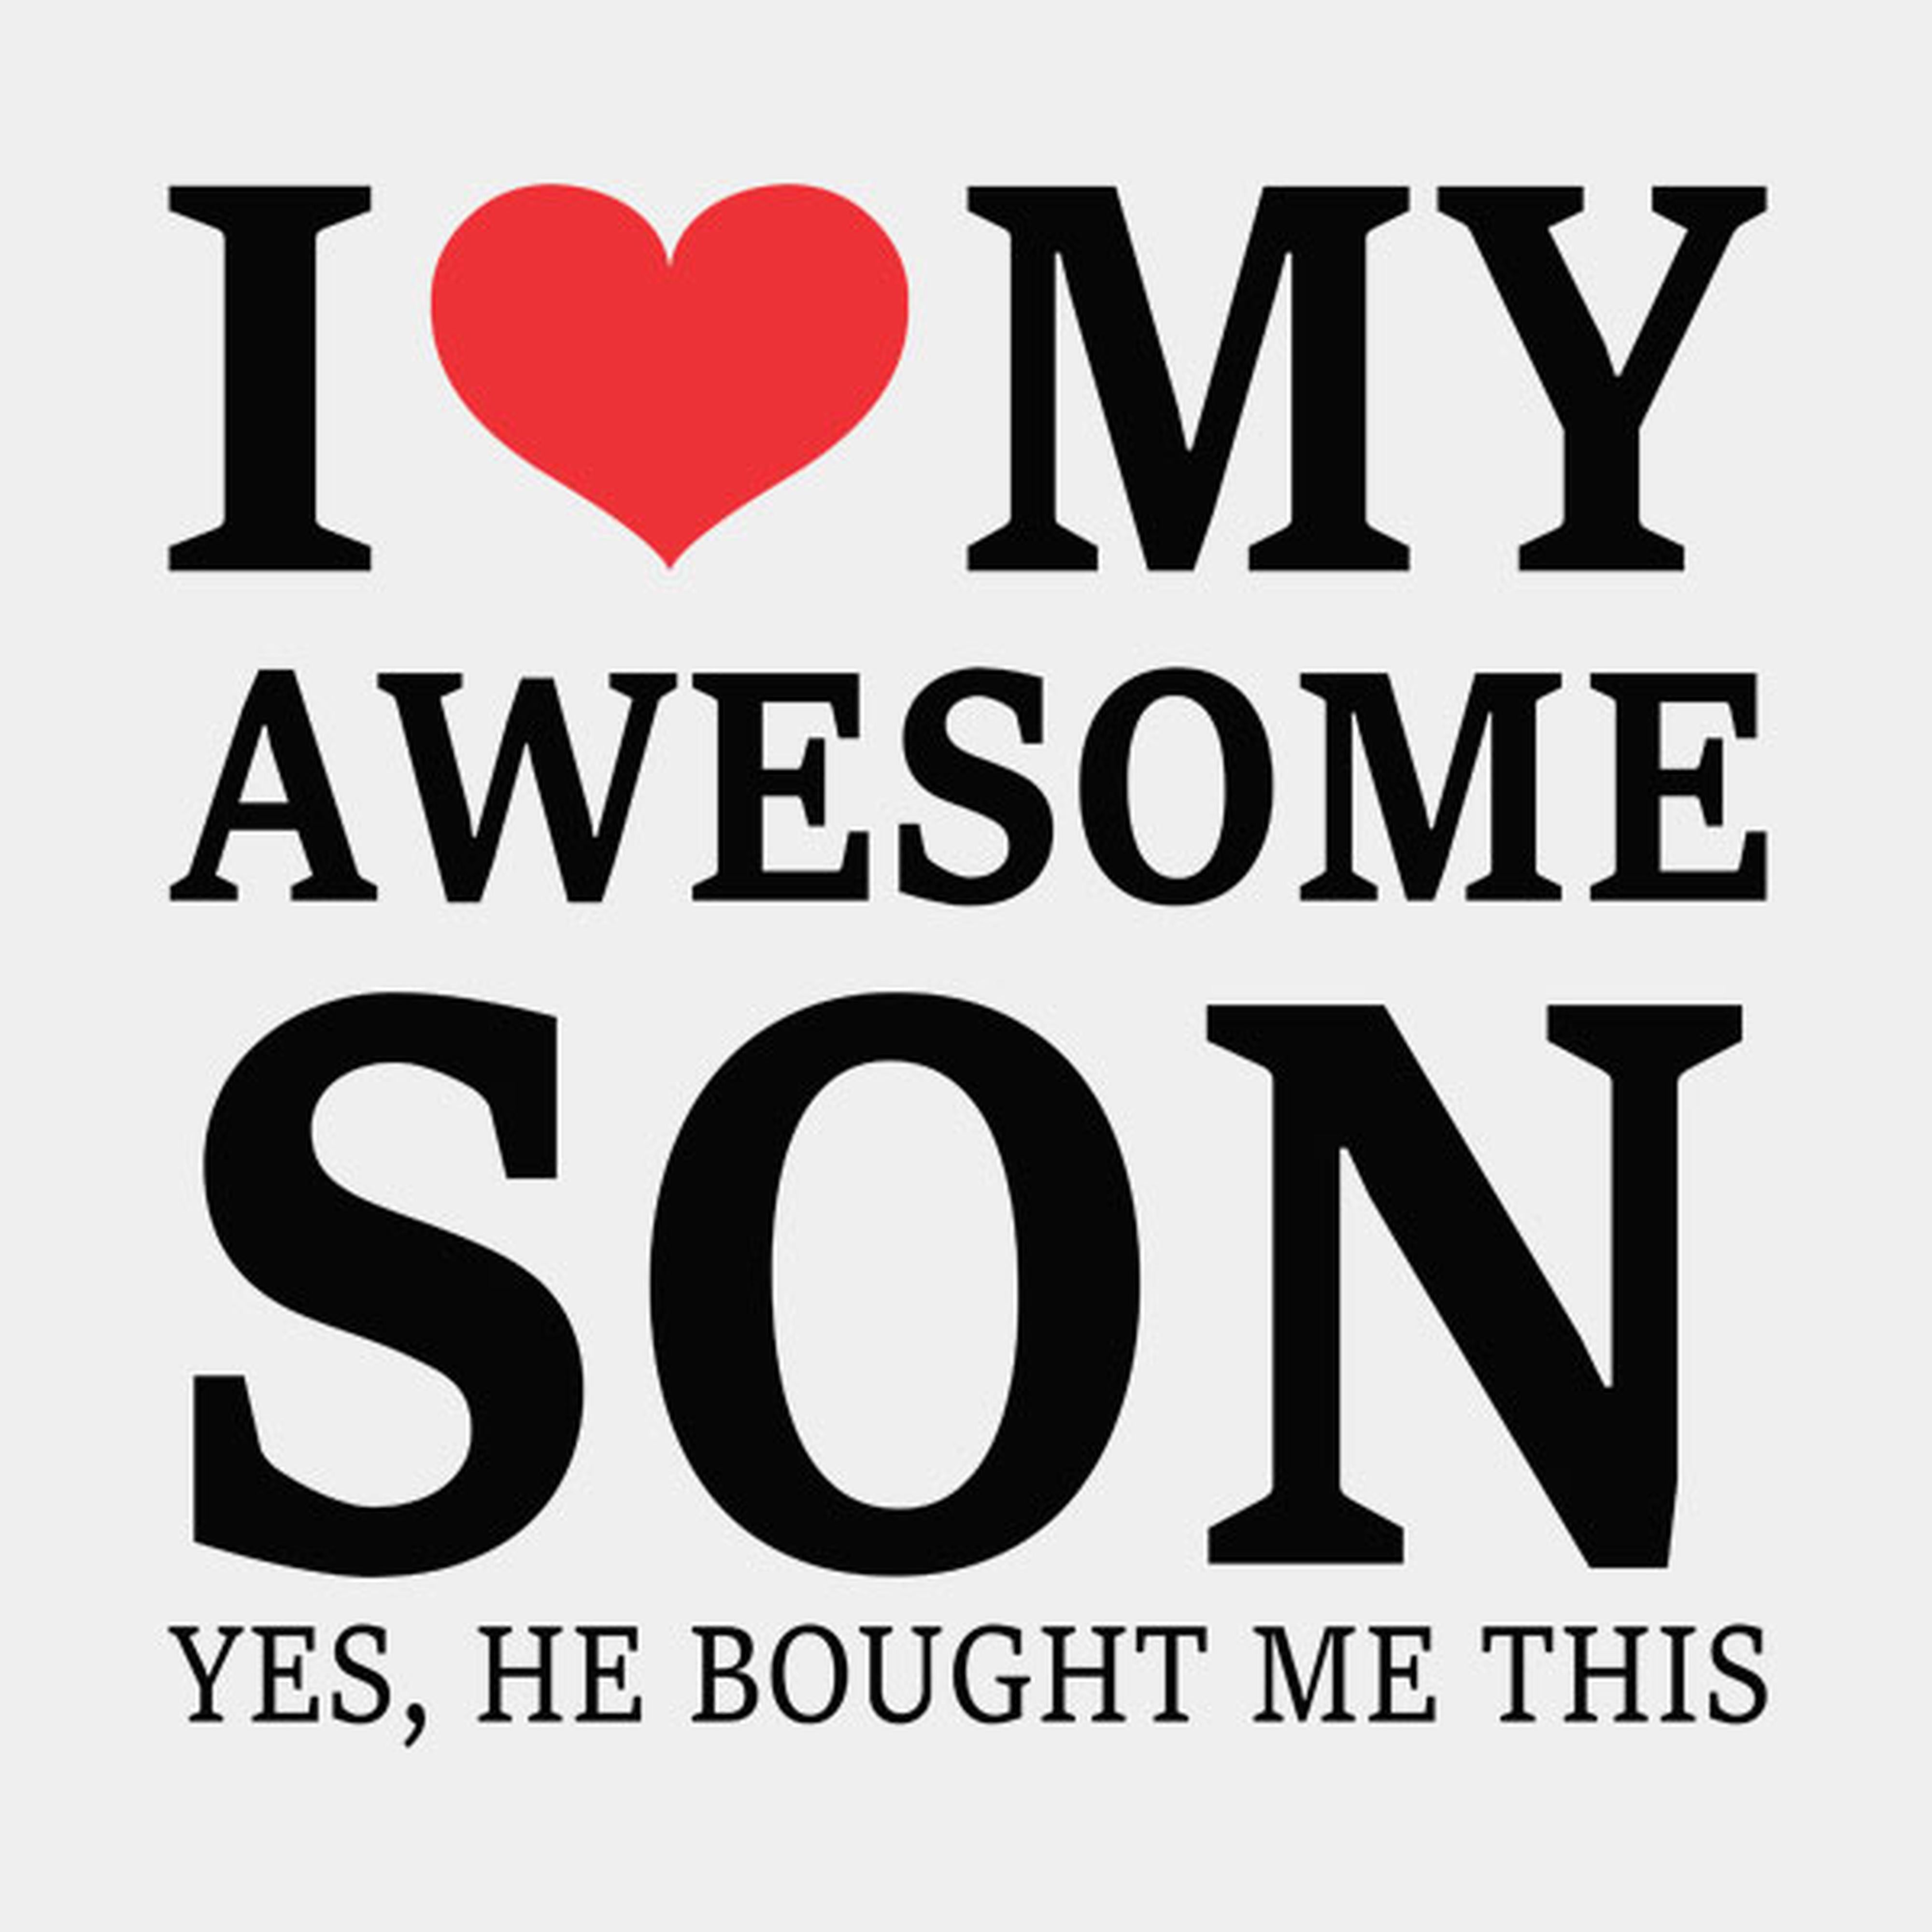 I love my awesome son - T-shirt